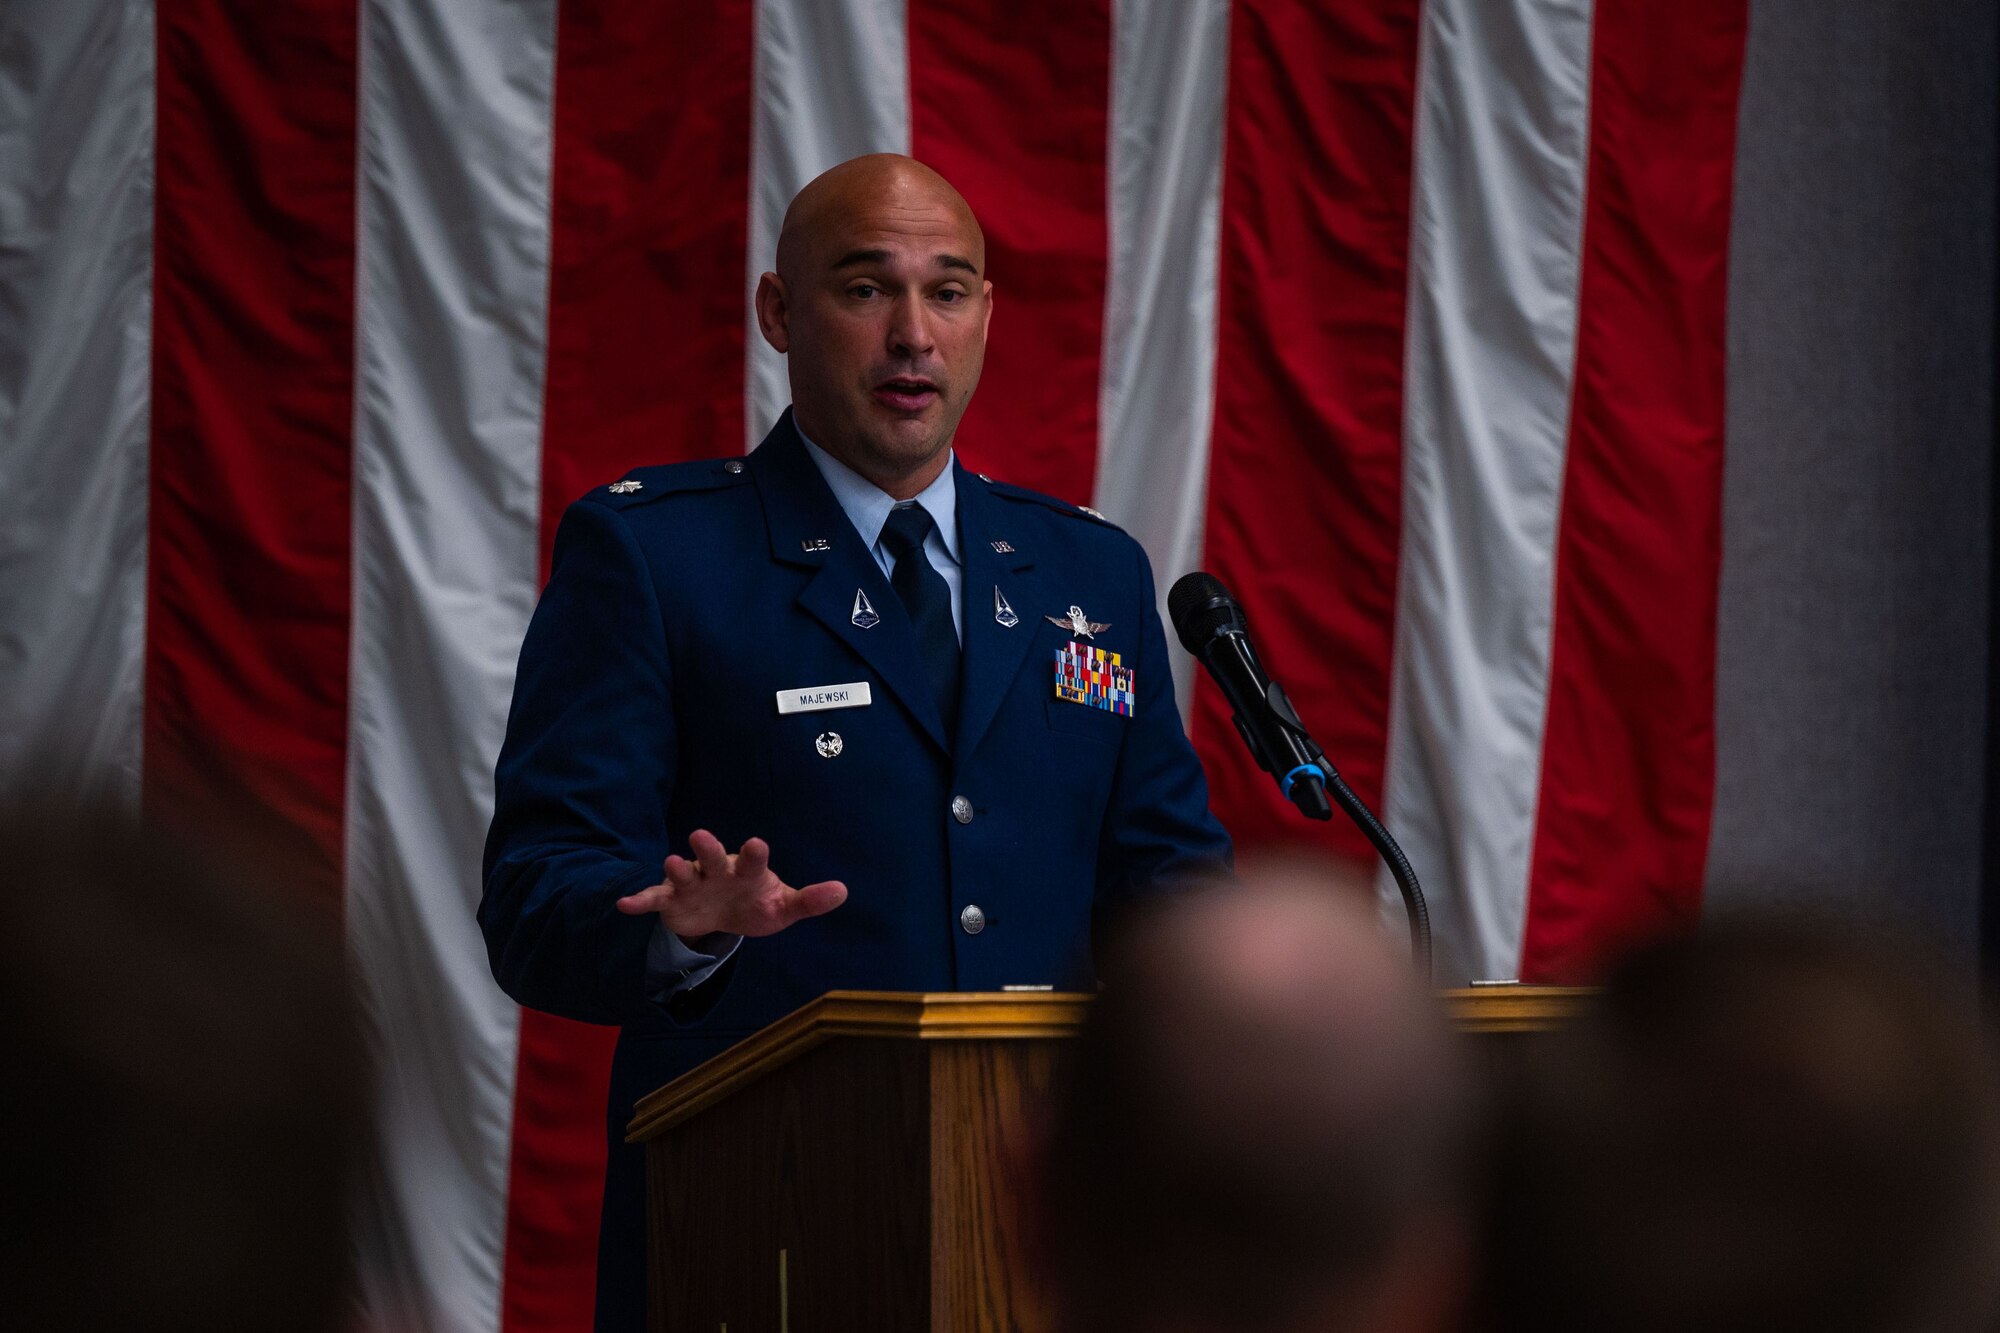 U.S. Space Force Lt. Col. Jacob Majewski, incoming 65th Cyberspace Squadron (65 CYS) commander, speaks at a podium during the 65 CYS change of command ceremony at Vandenberg Space Force Base, Calif., July 21, 2023. (U.S. Space Force photo by Tech. Sgt. Luke Kitterman)